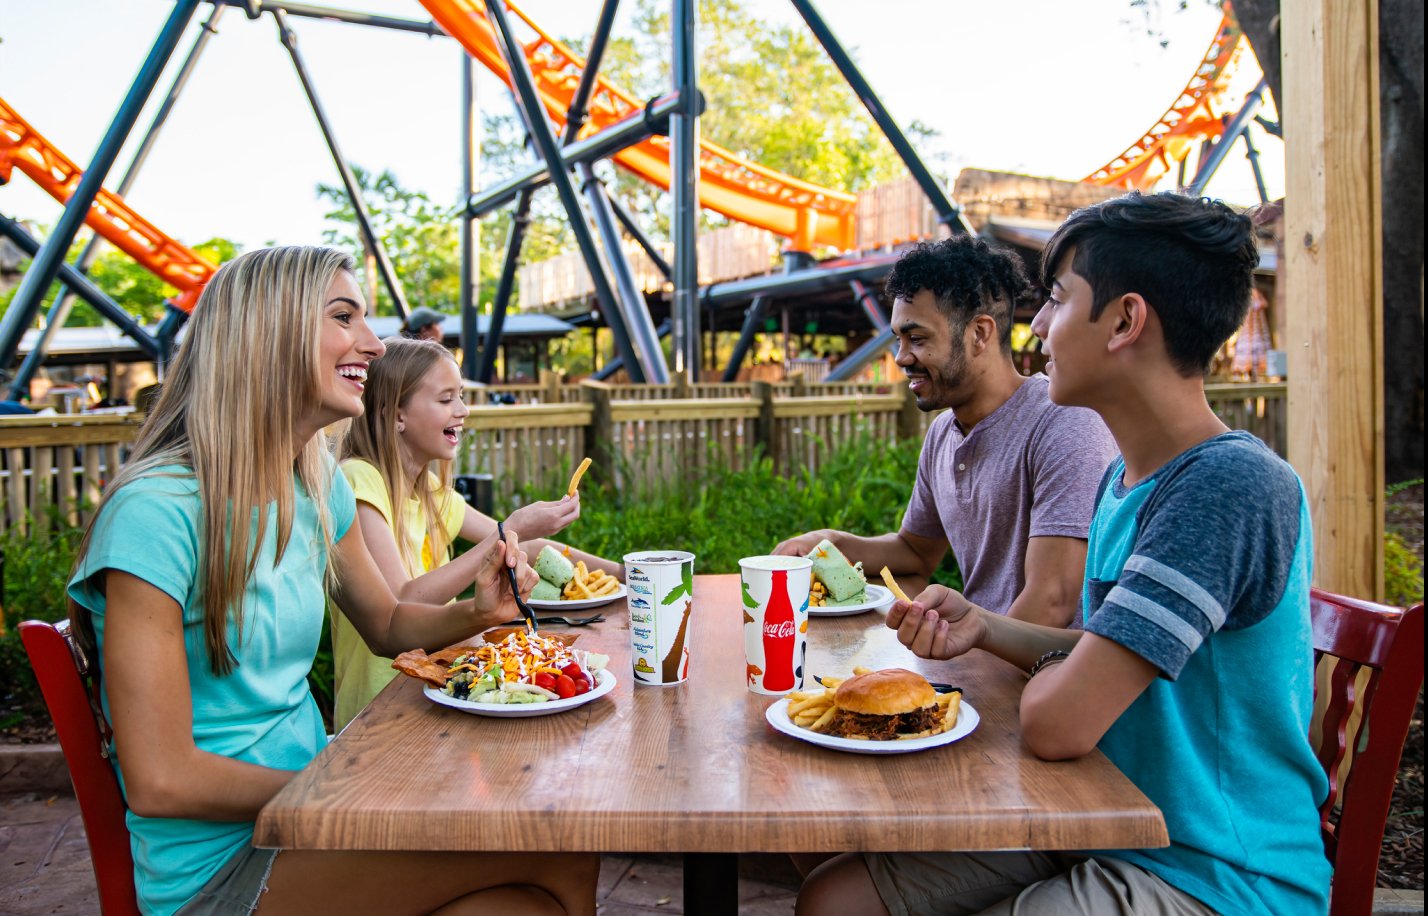 Eat for Free with Busch Gardens Tampa Bay's Vacation Packages.